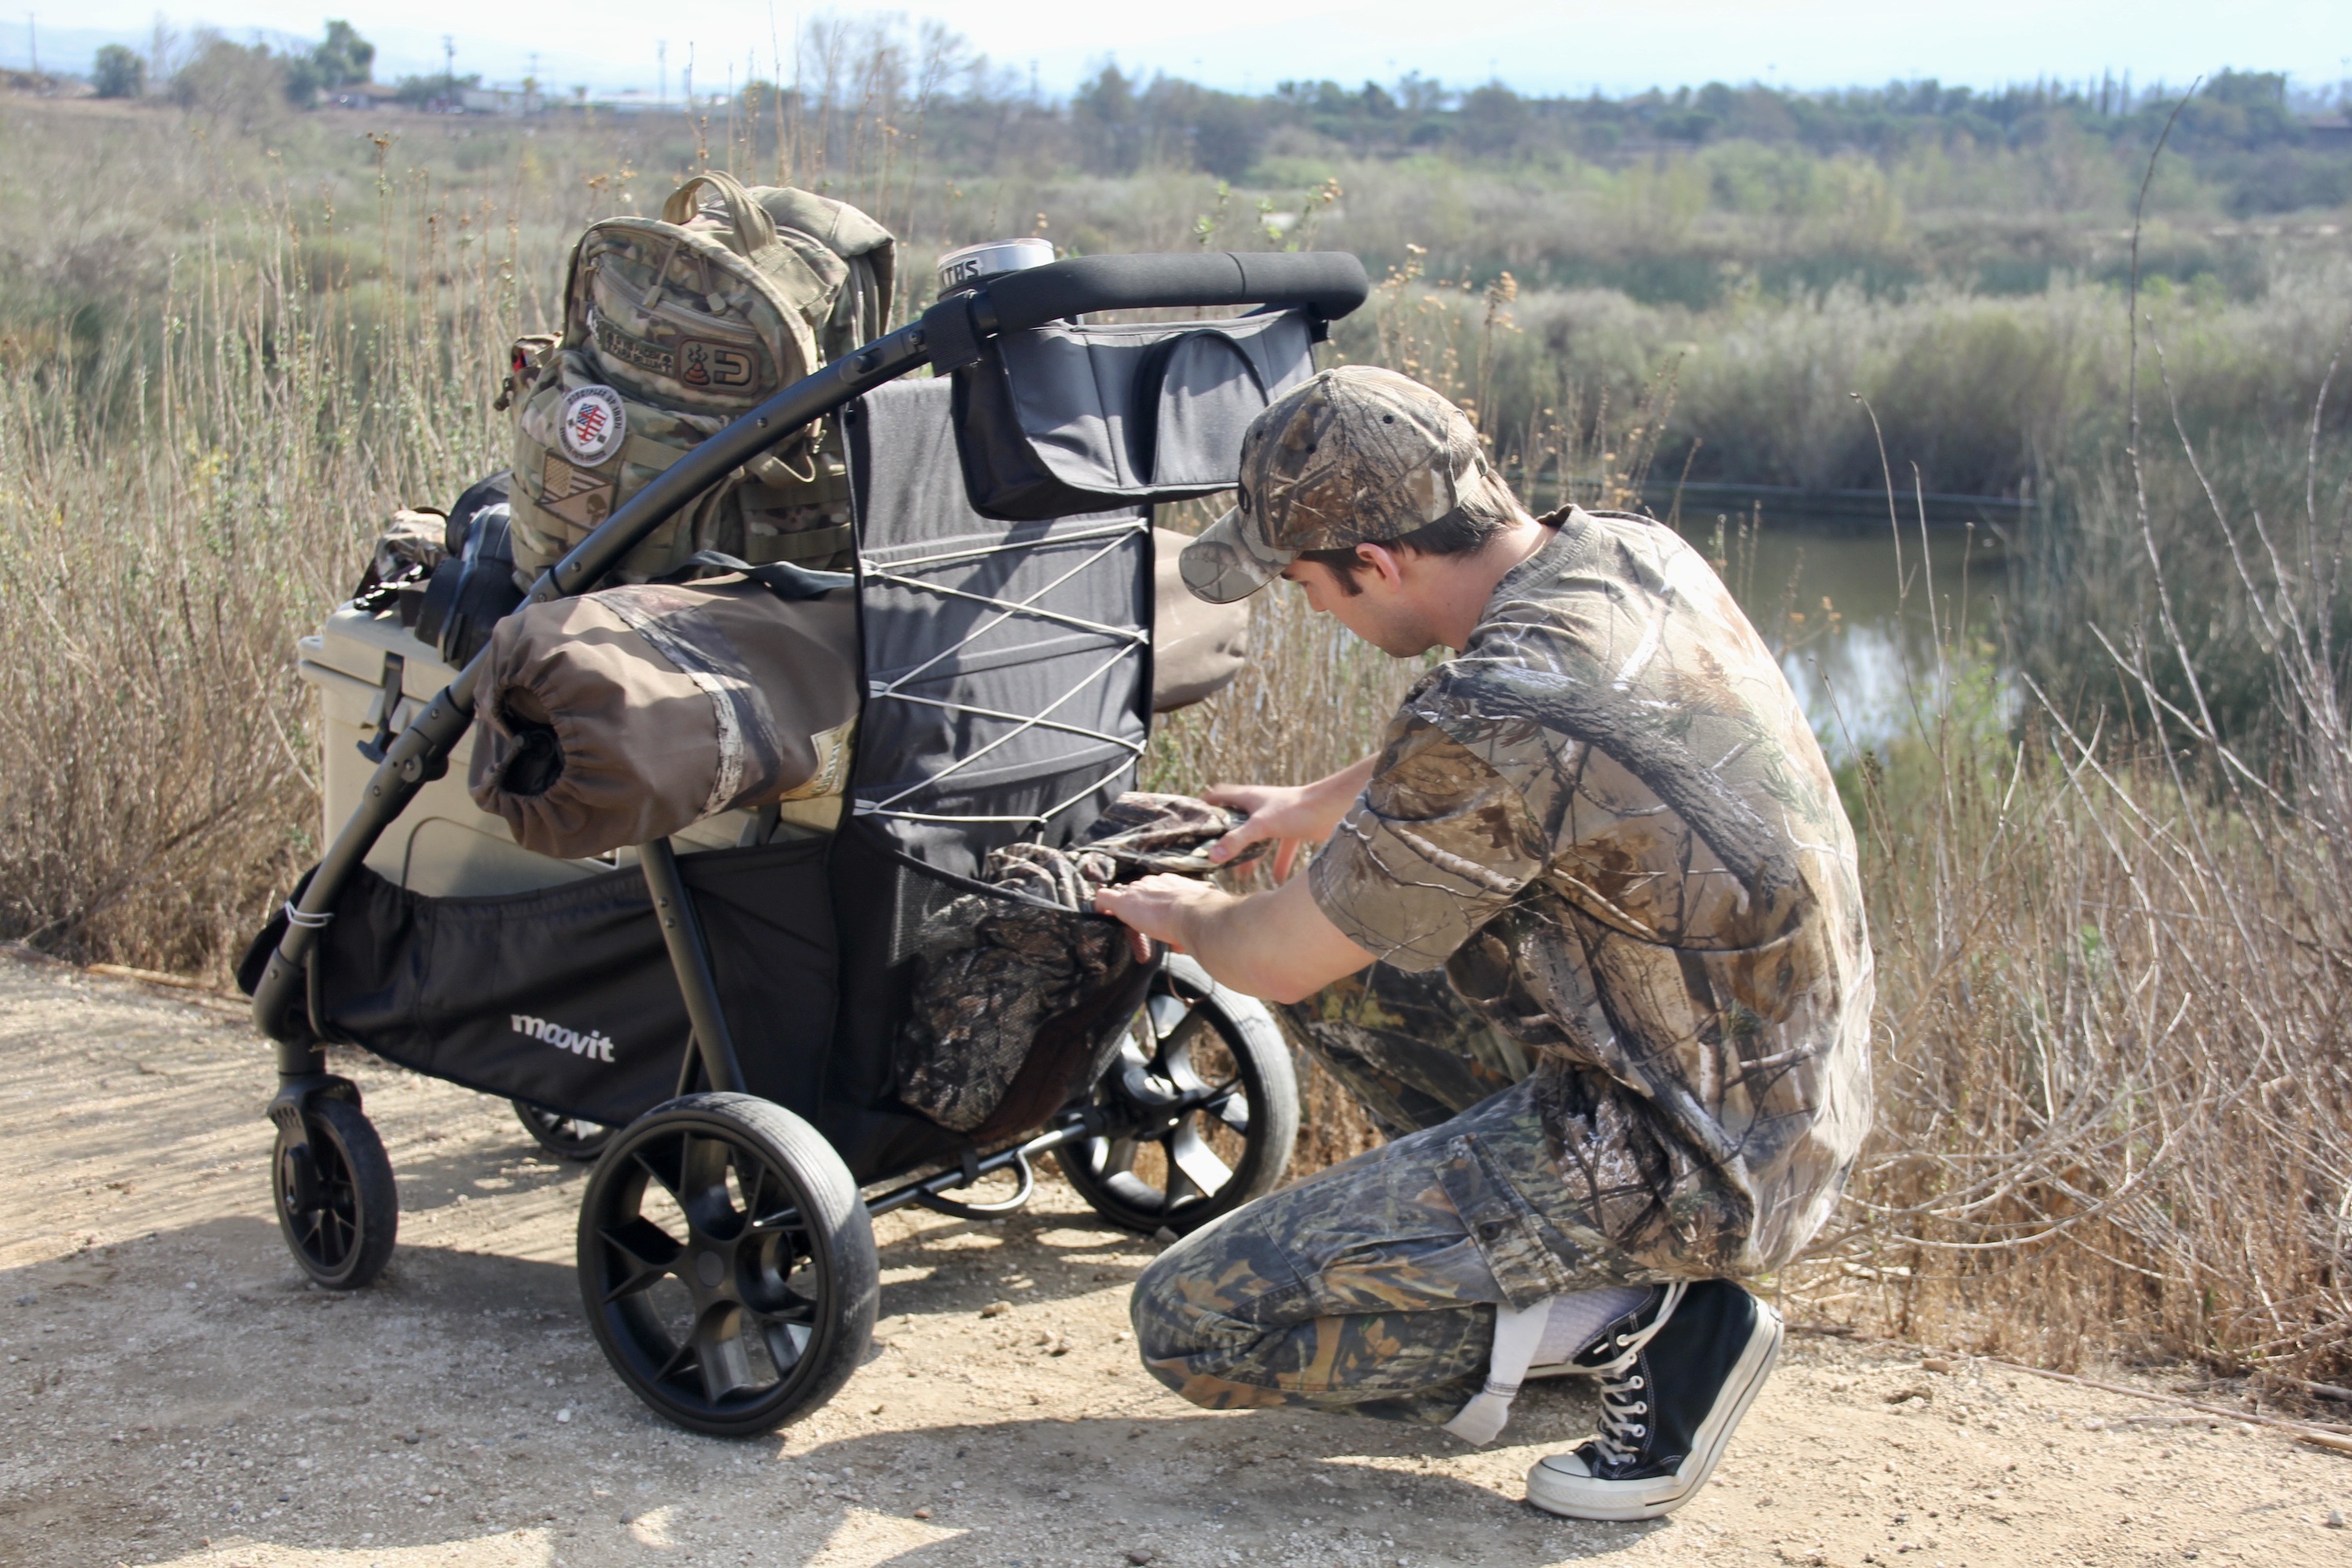 Perfect for camping, hunting, and fishing, the Platoon gets your gear where you're going.